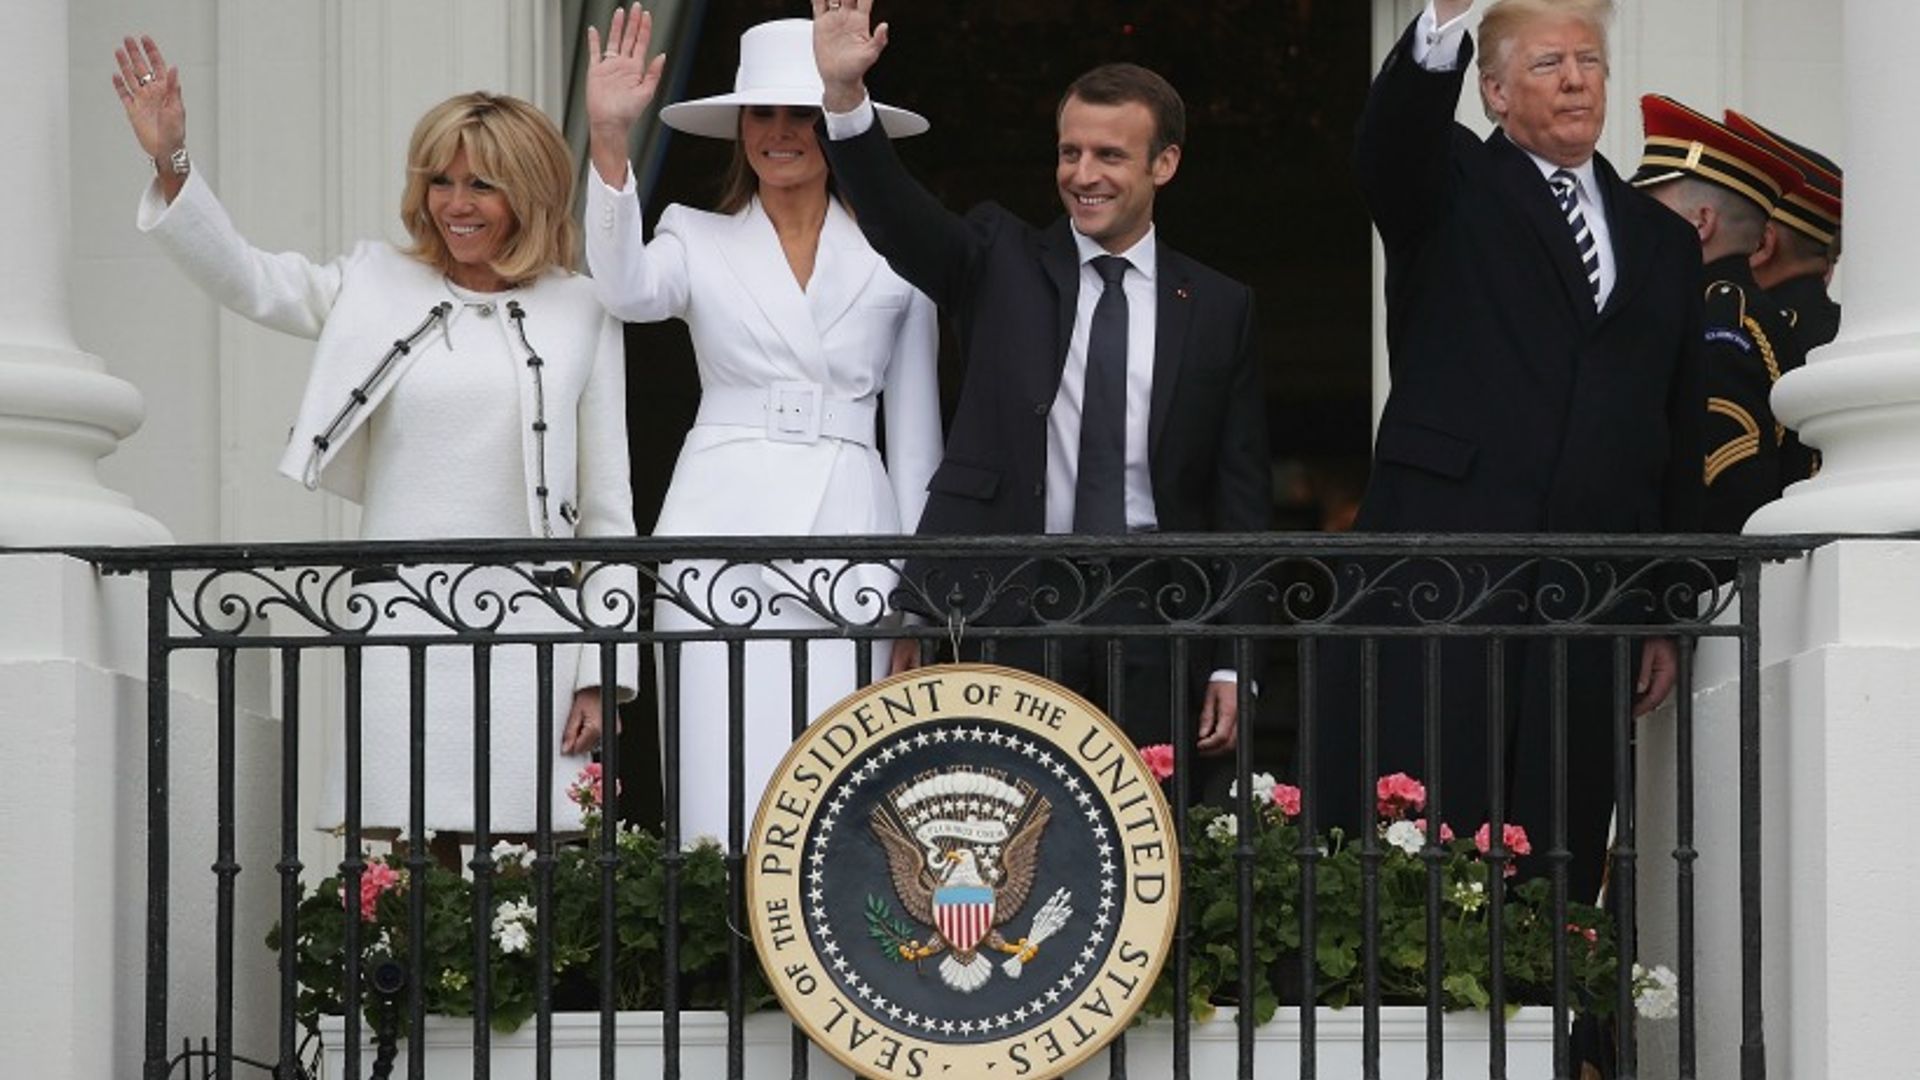 When the women steal the show! Why everyone is talking about Melania Trump & Brigitte Macron